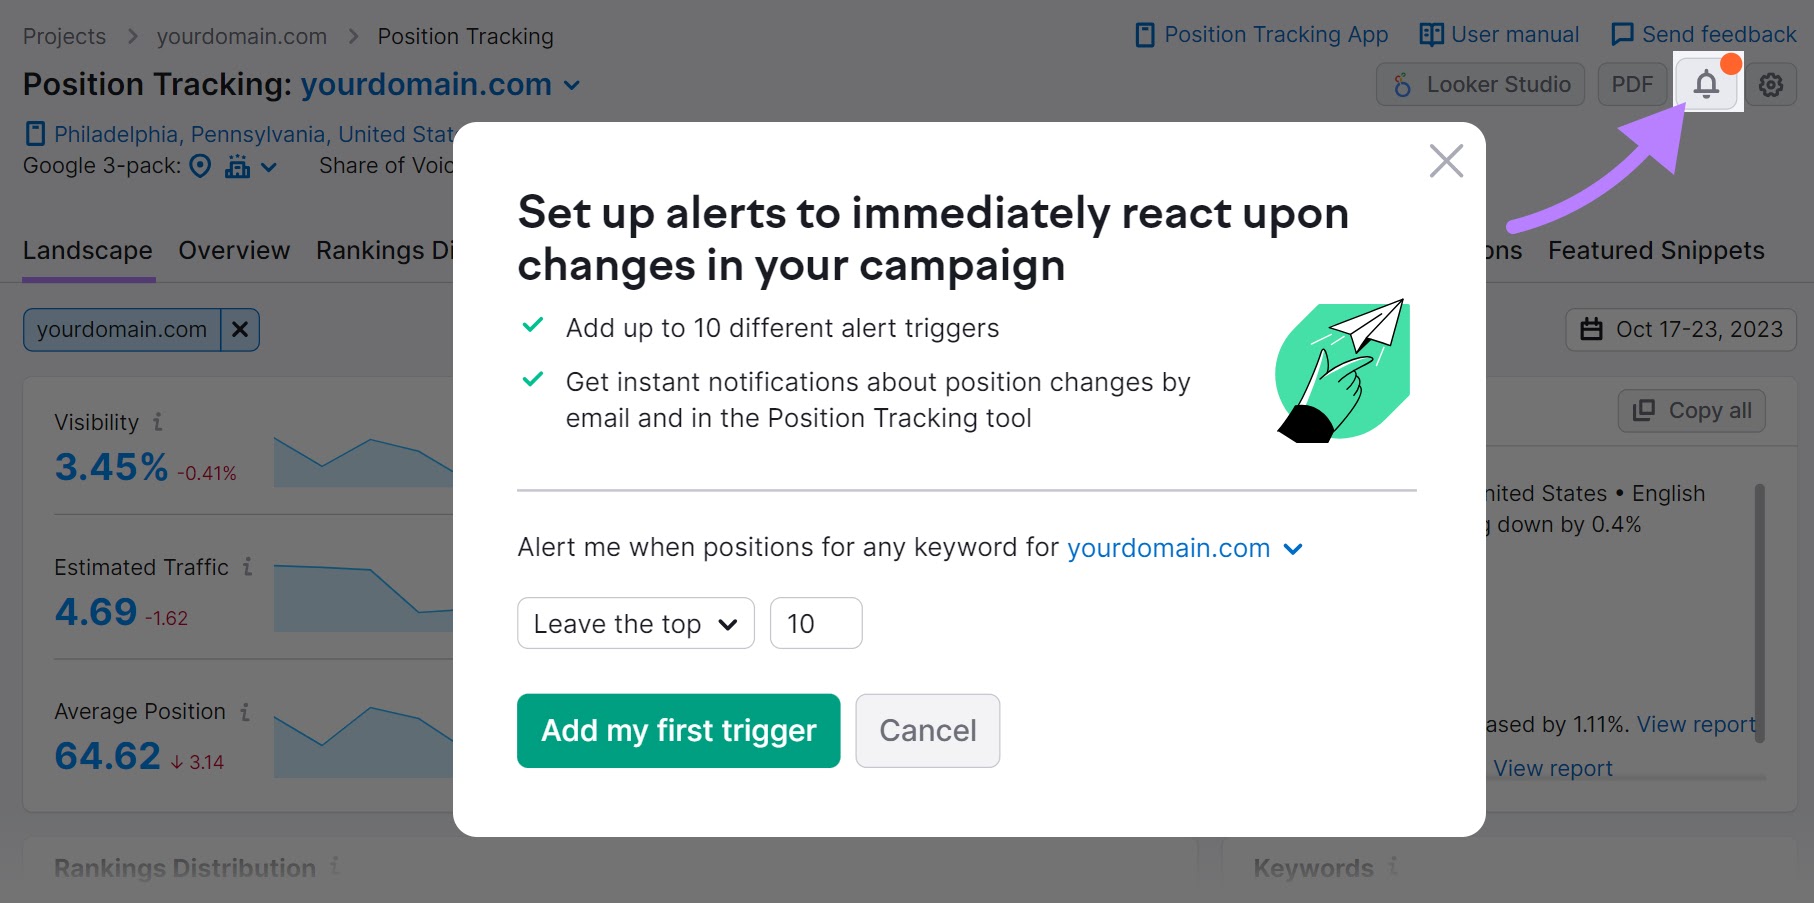 "Set up alerts to immediately react upon changes in your campaign" pop-up window in Position Tracking tool